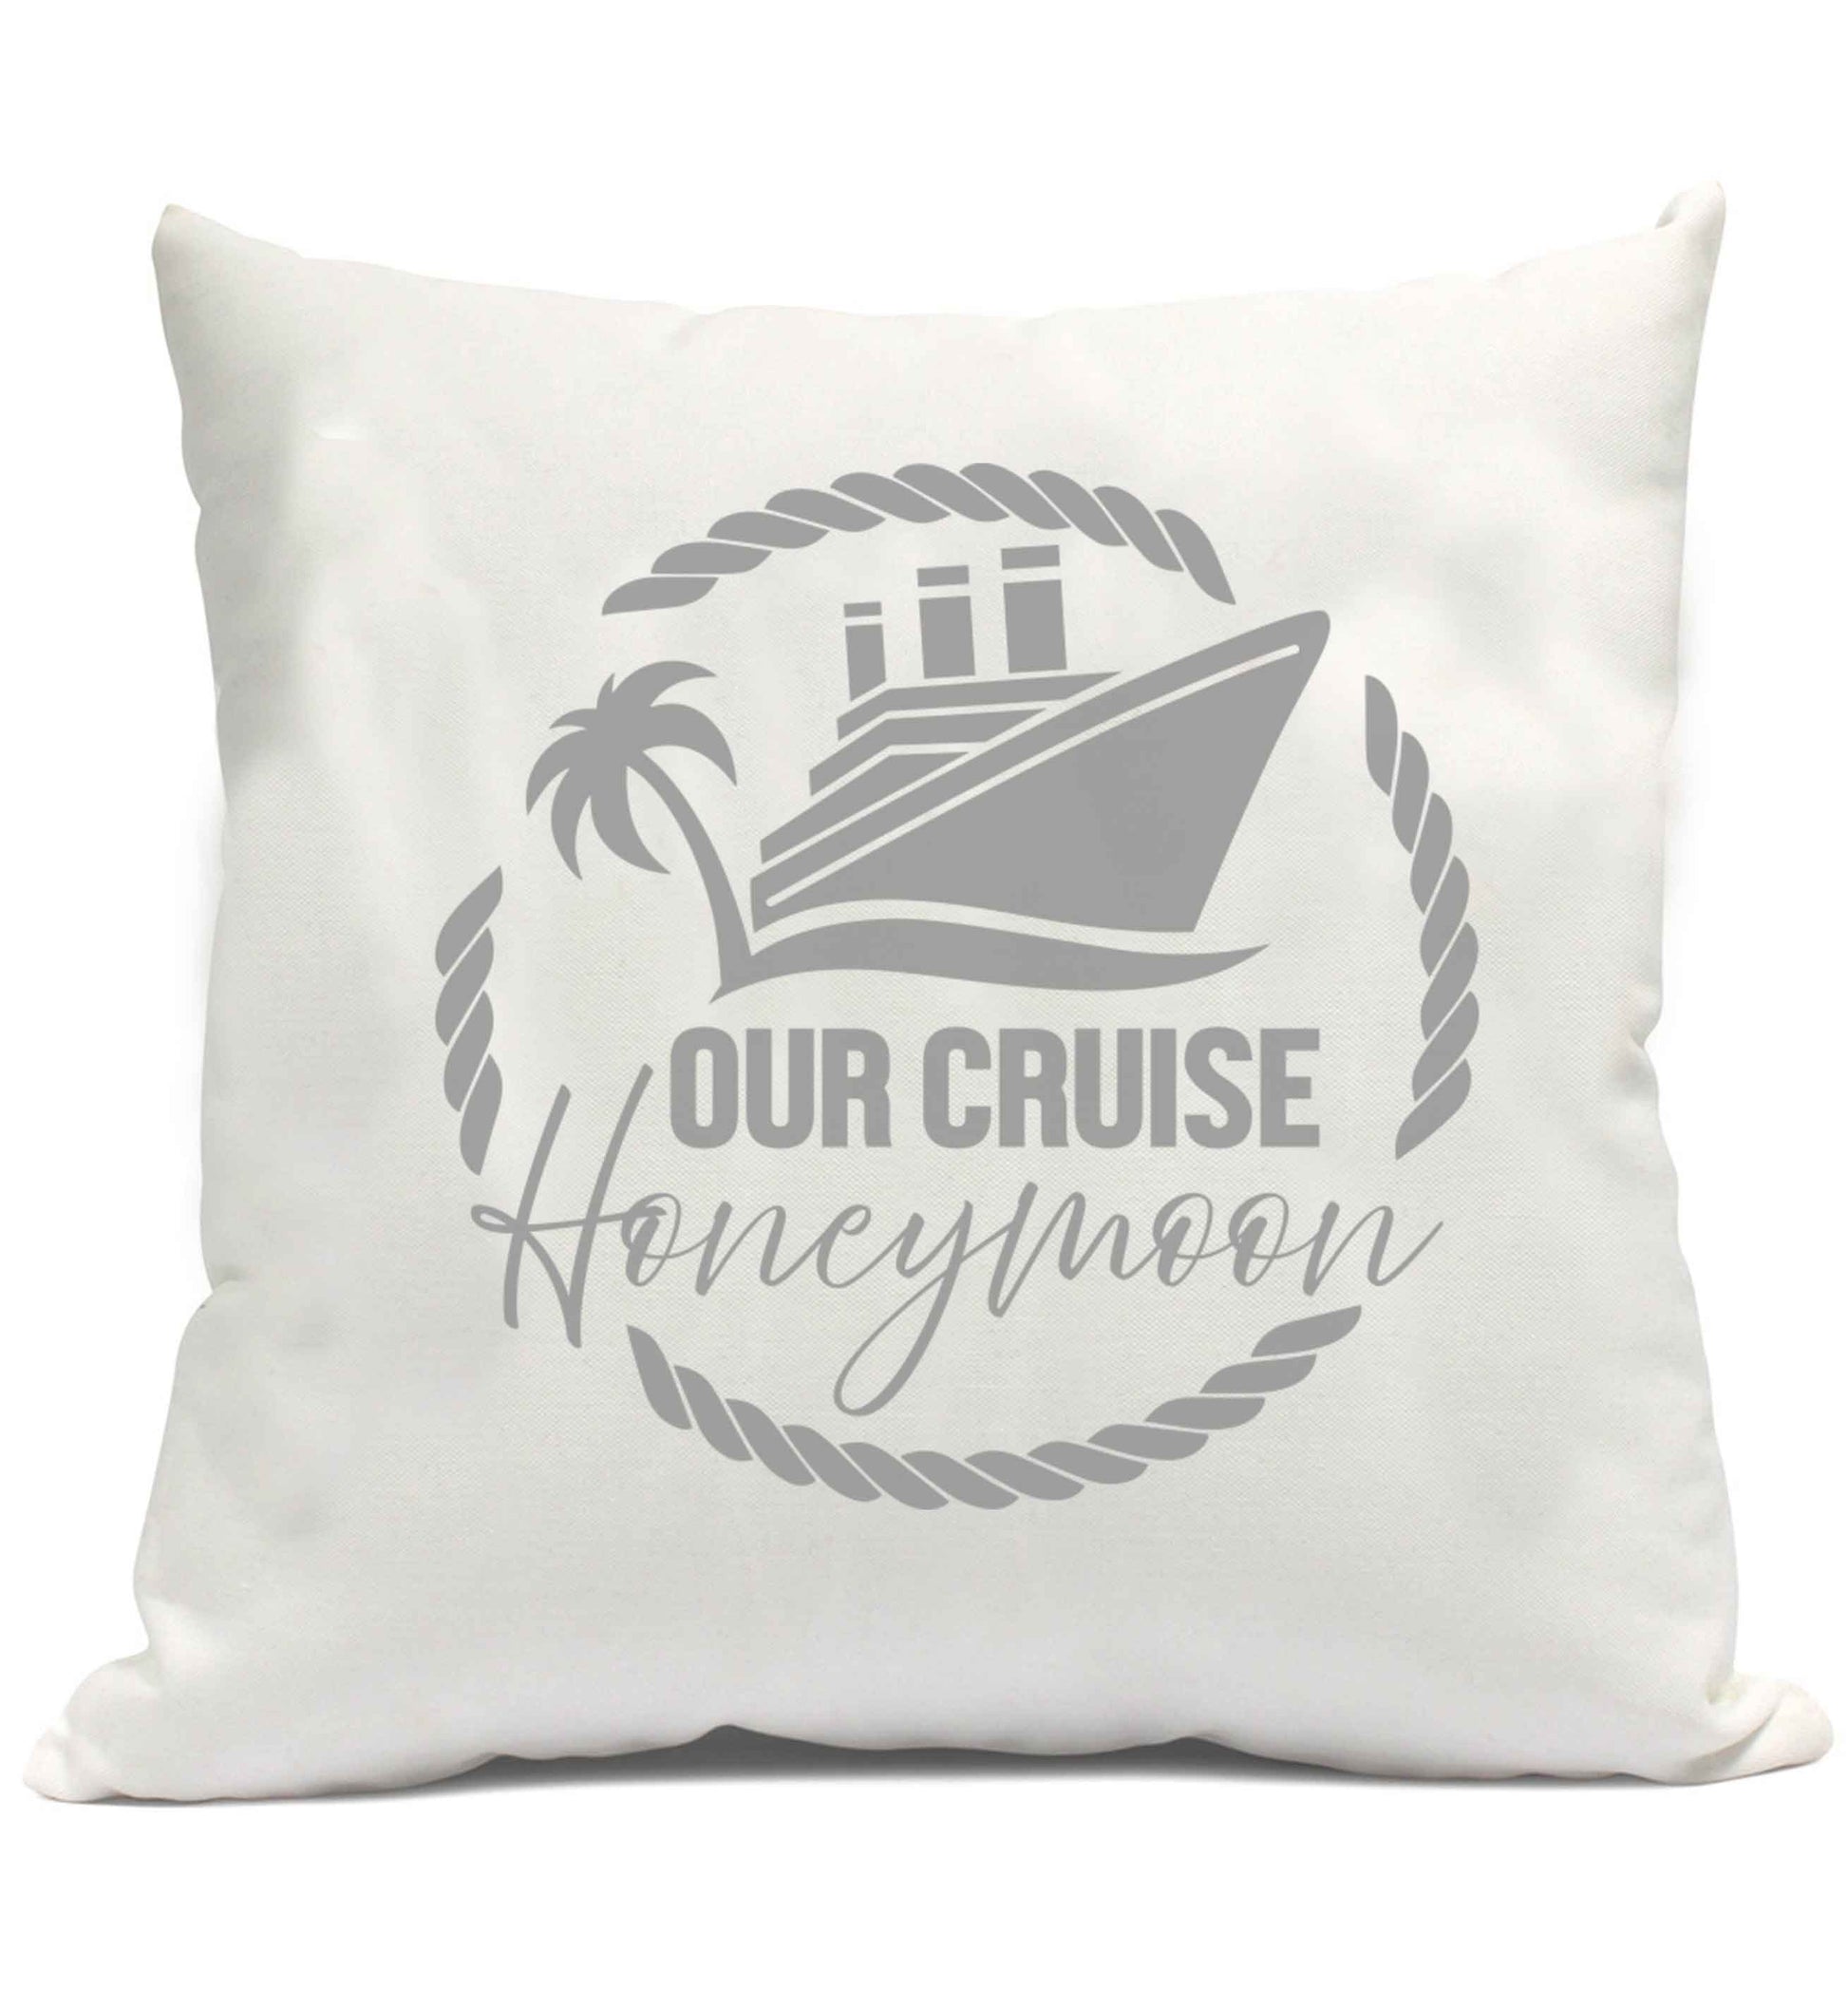 Our cruise honeymoon cushion cover and filling